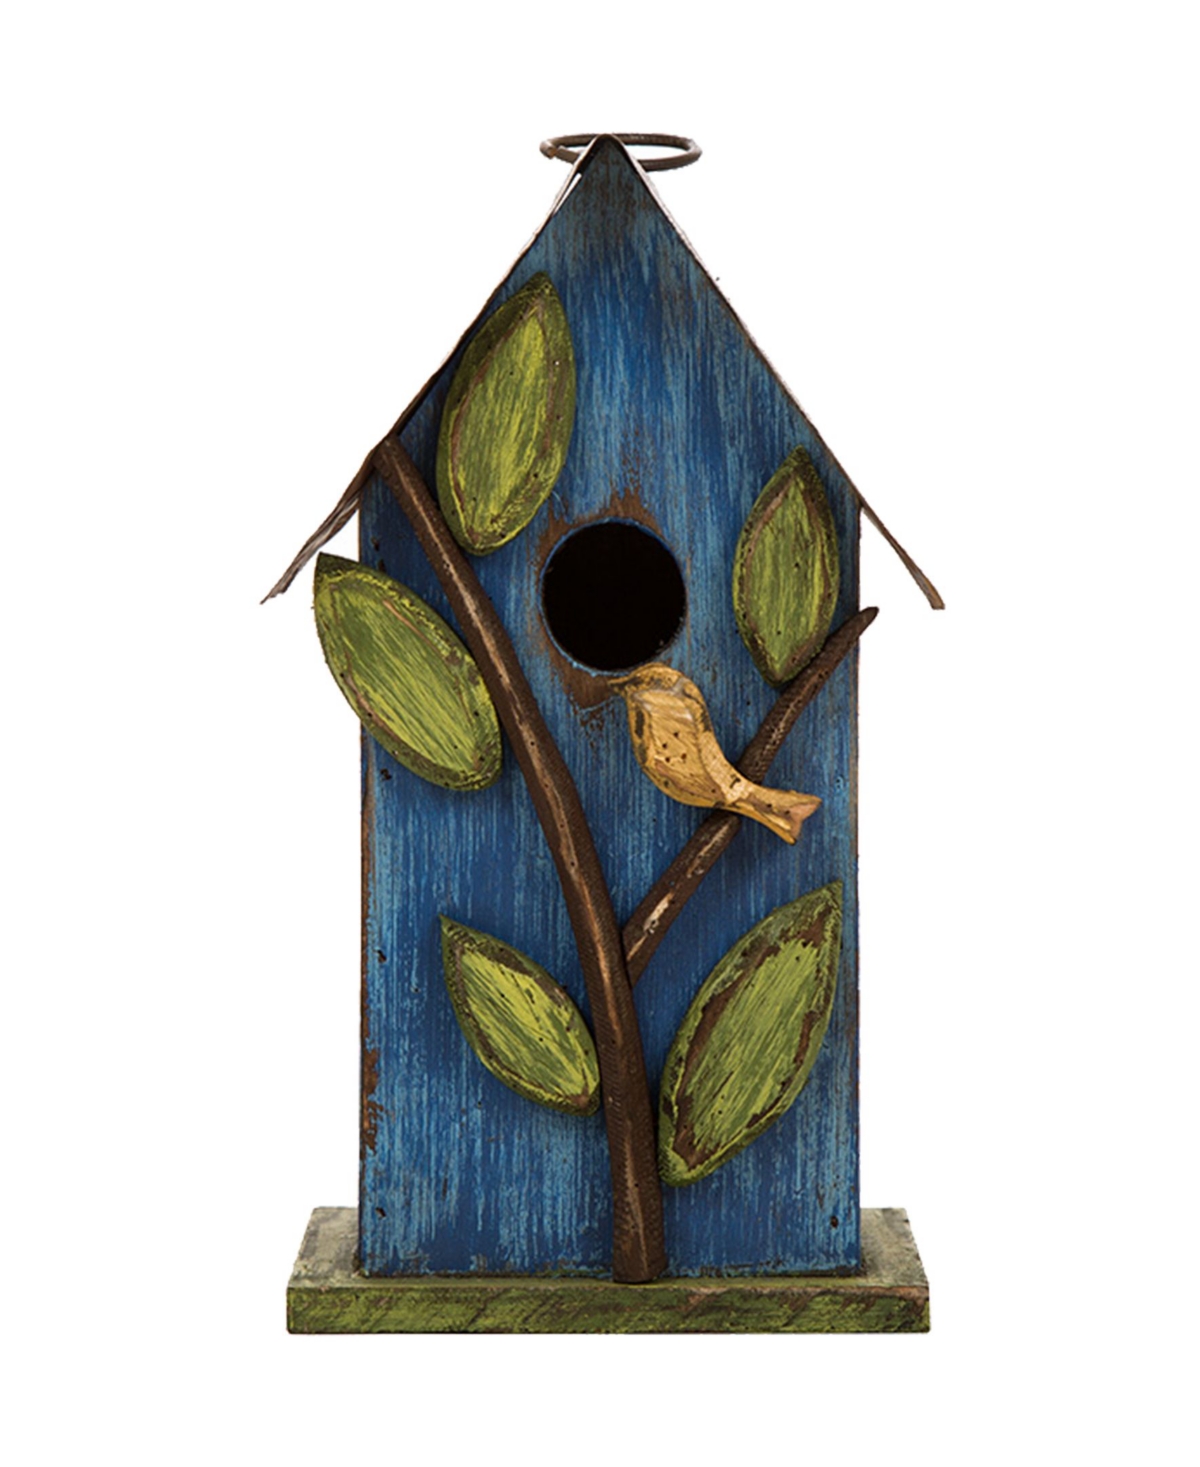 Distressed Solid Wood Birdhouse with Leaves - Blue